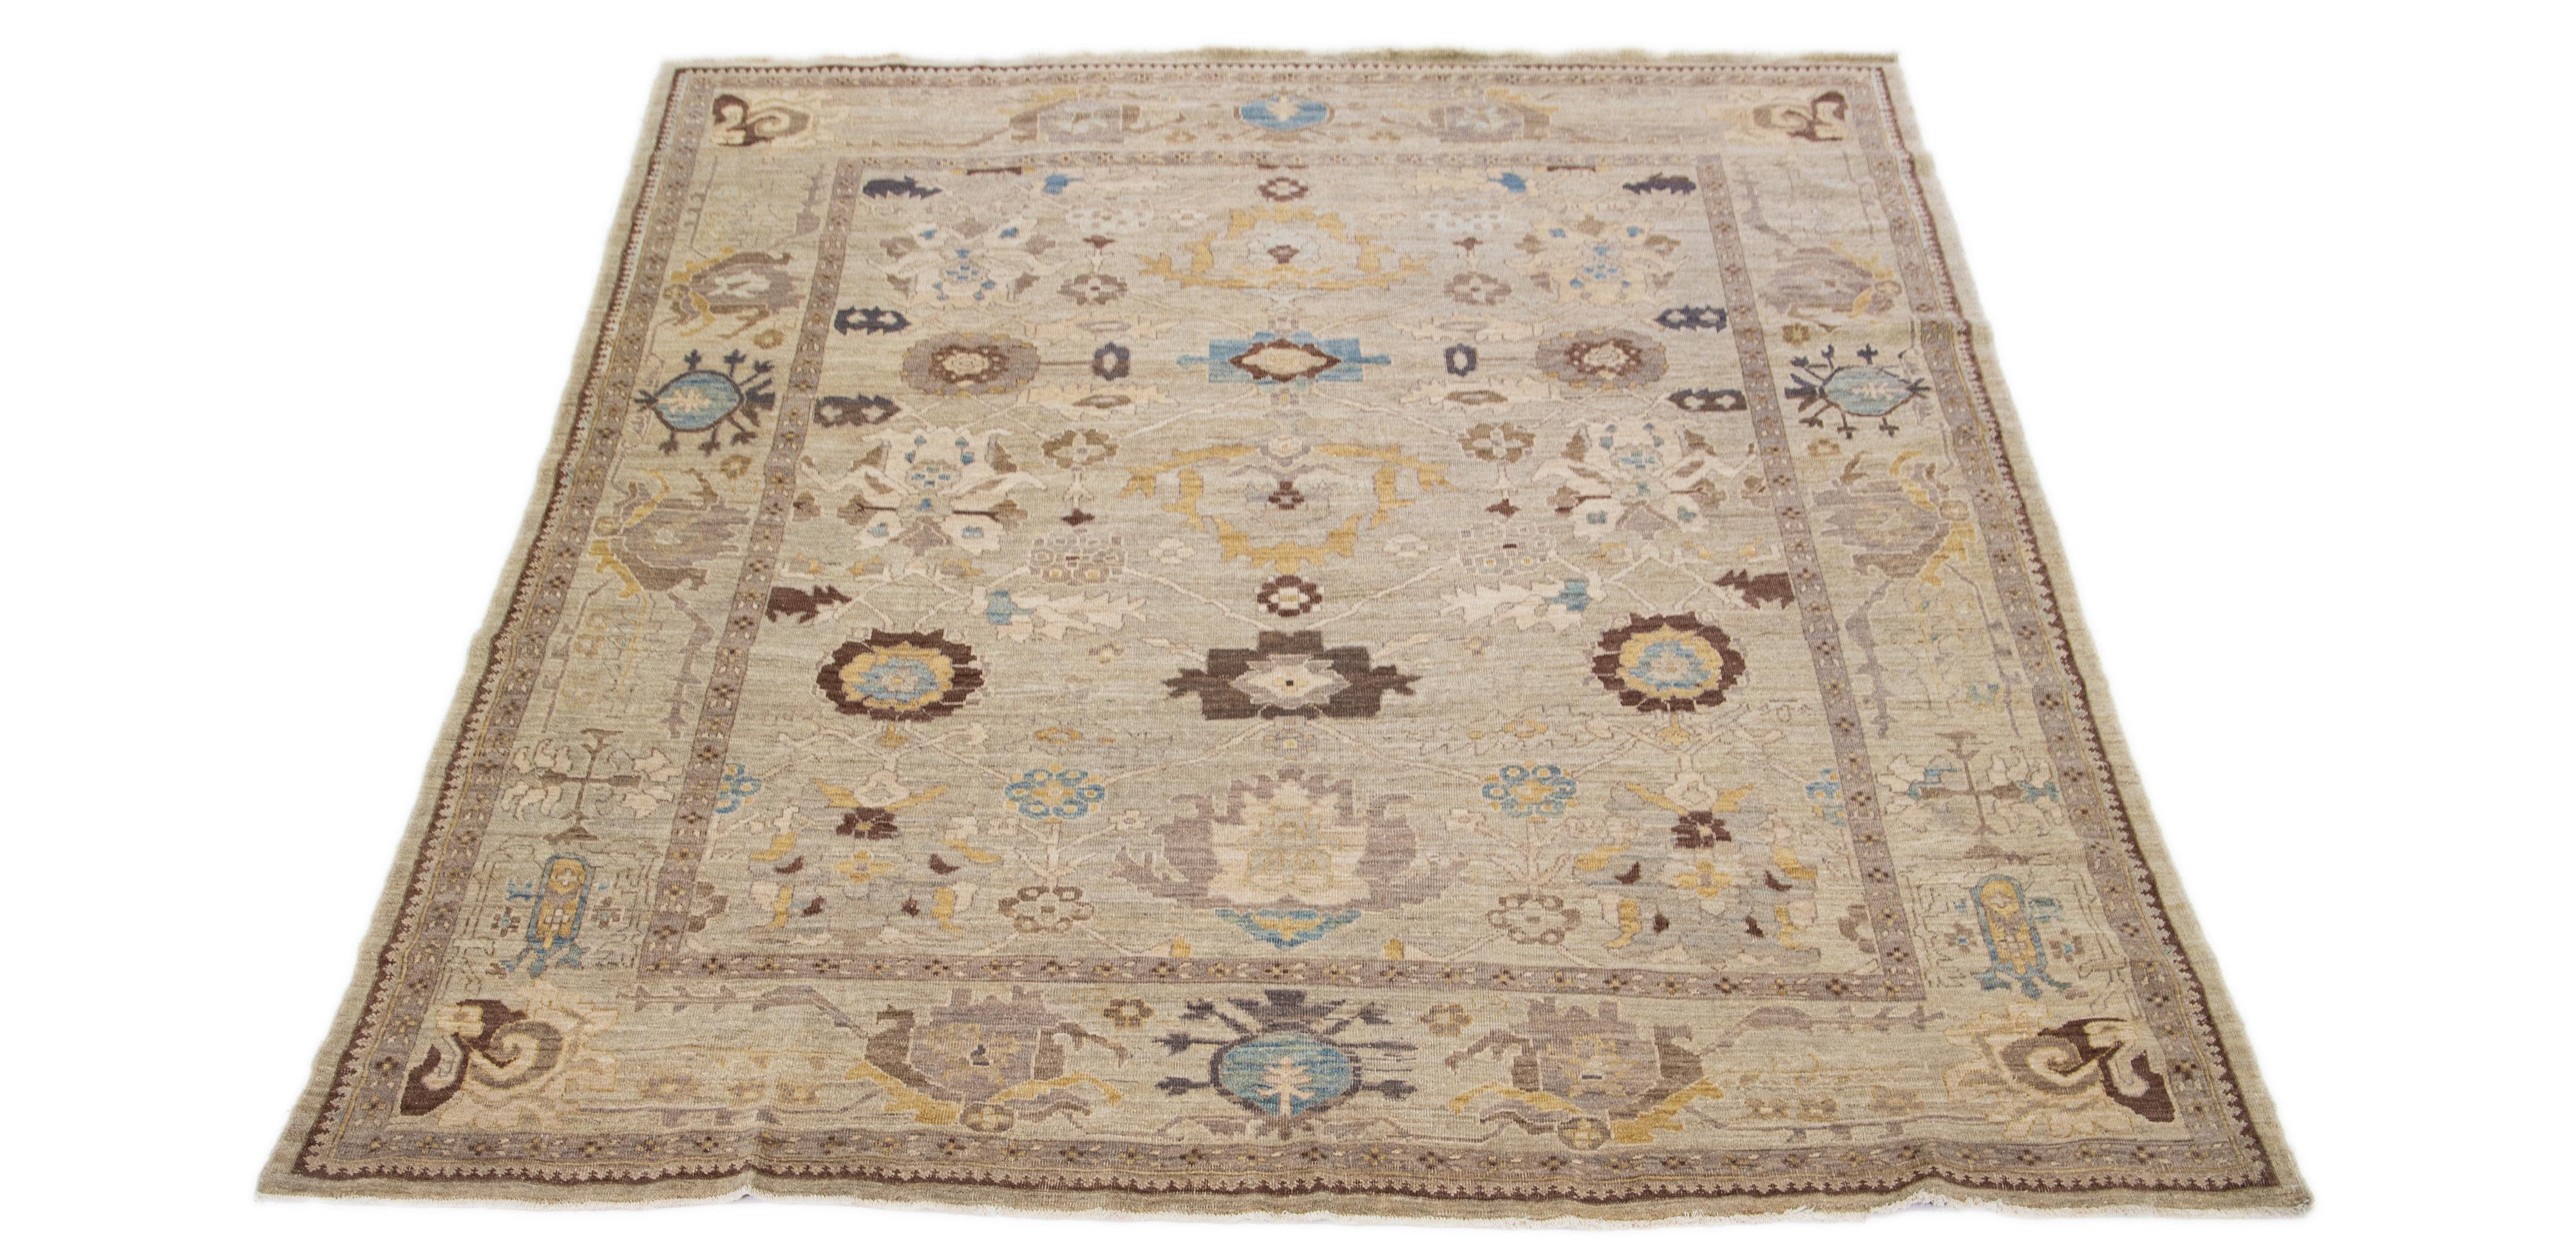 This modern reinterpretation of timeless Sultanabad design is beautifully manifested in a hand-knotted wool rug, resplendent in its striking light brown shade. An intricate border delineates its all-over floral embroidery, embellished with